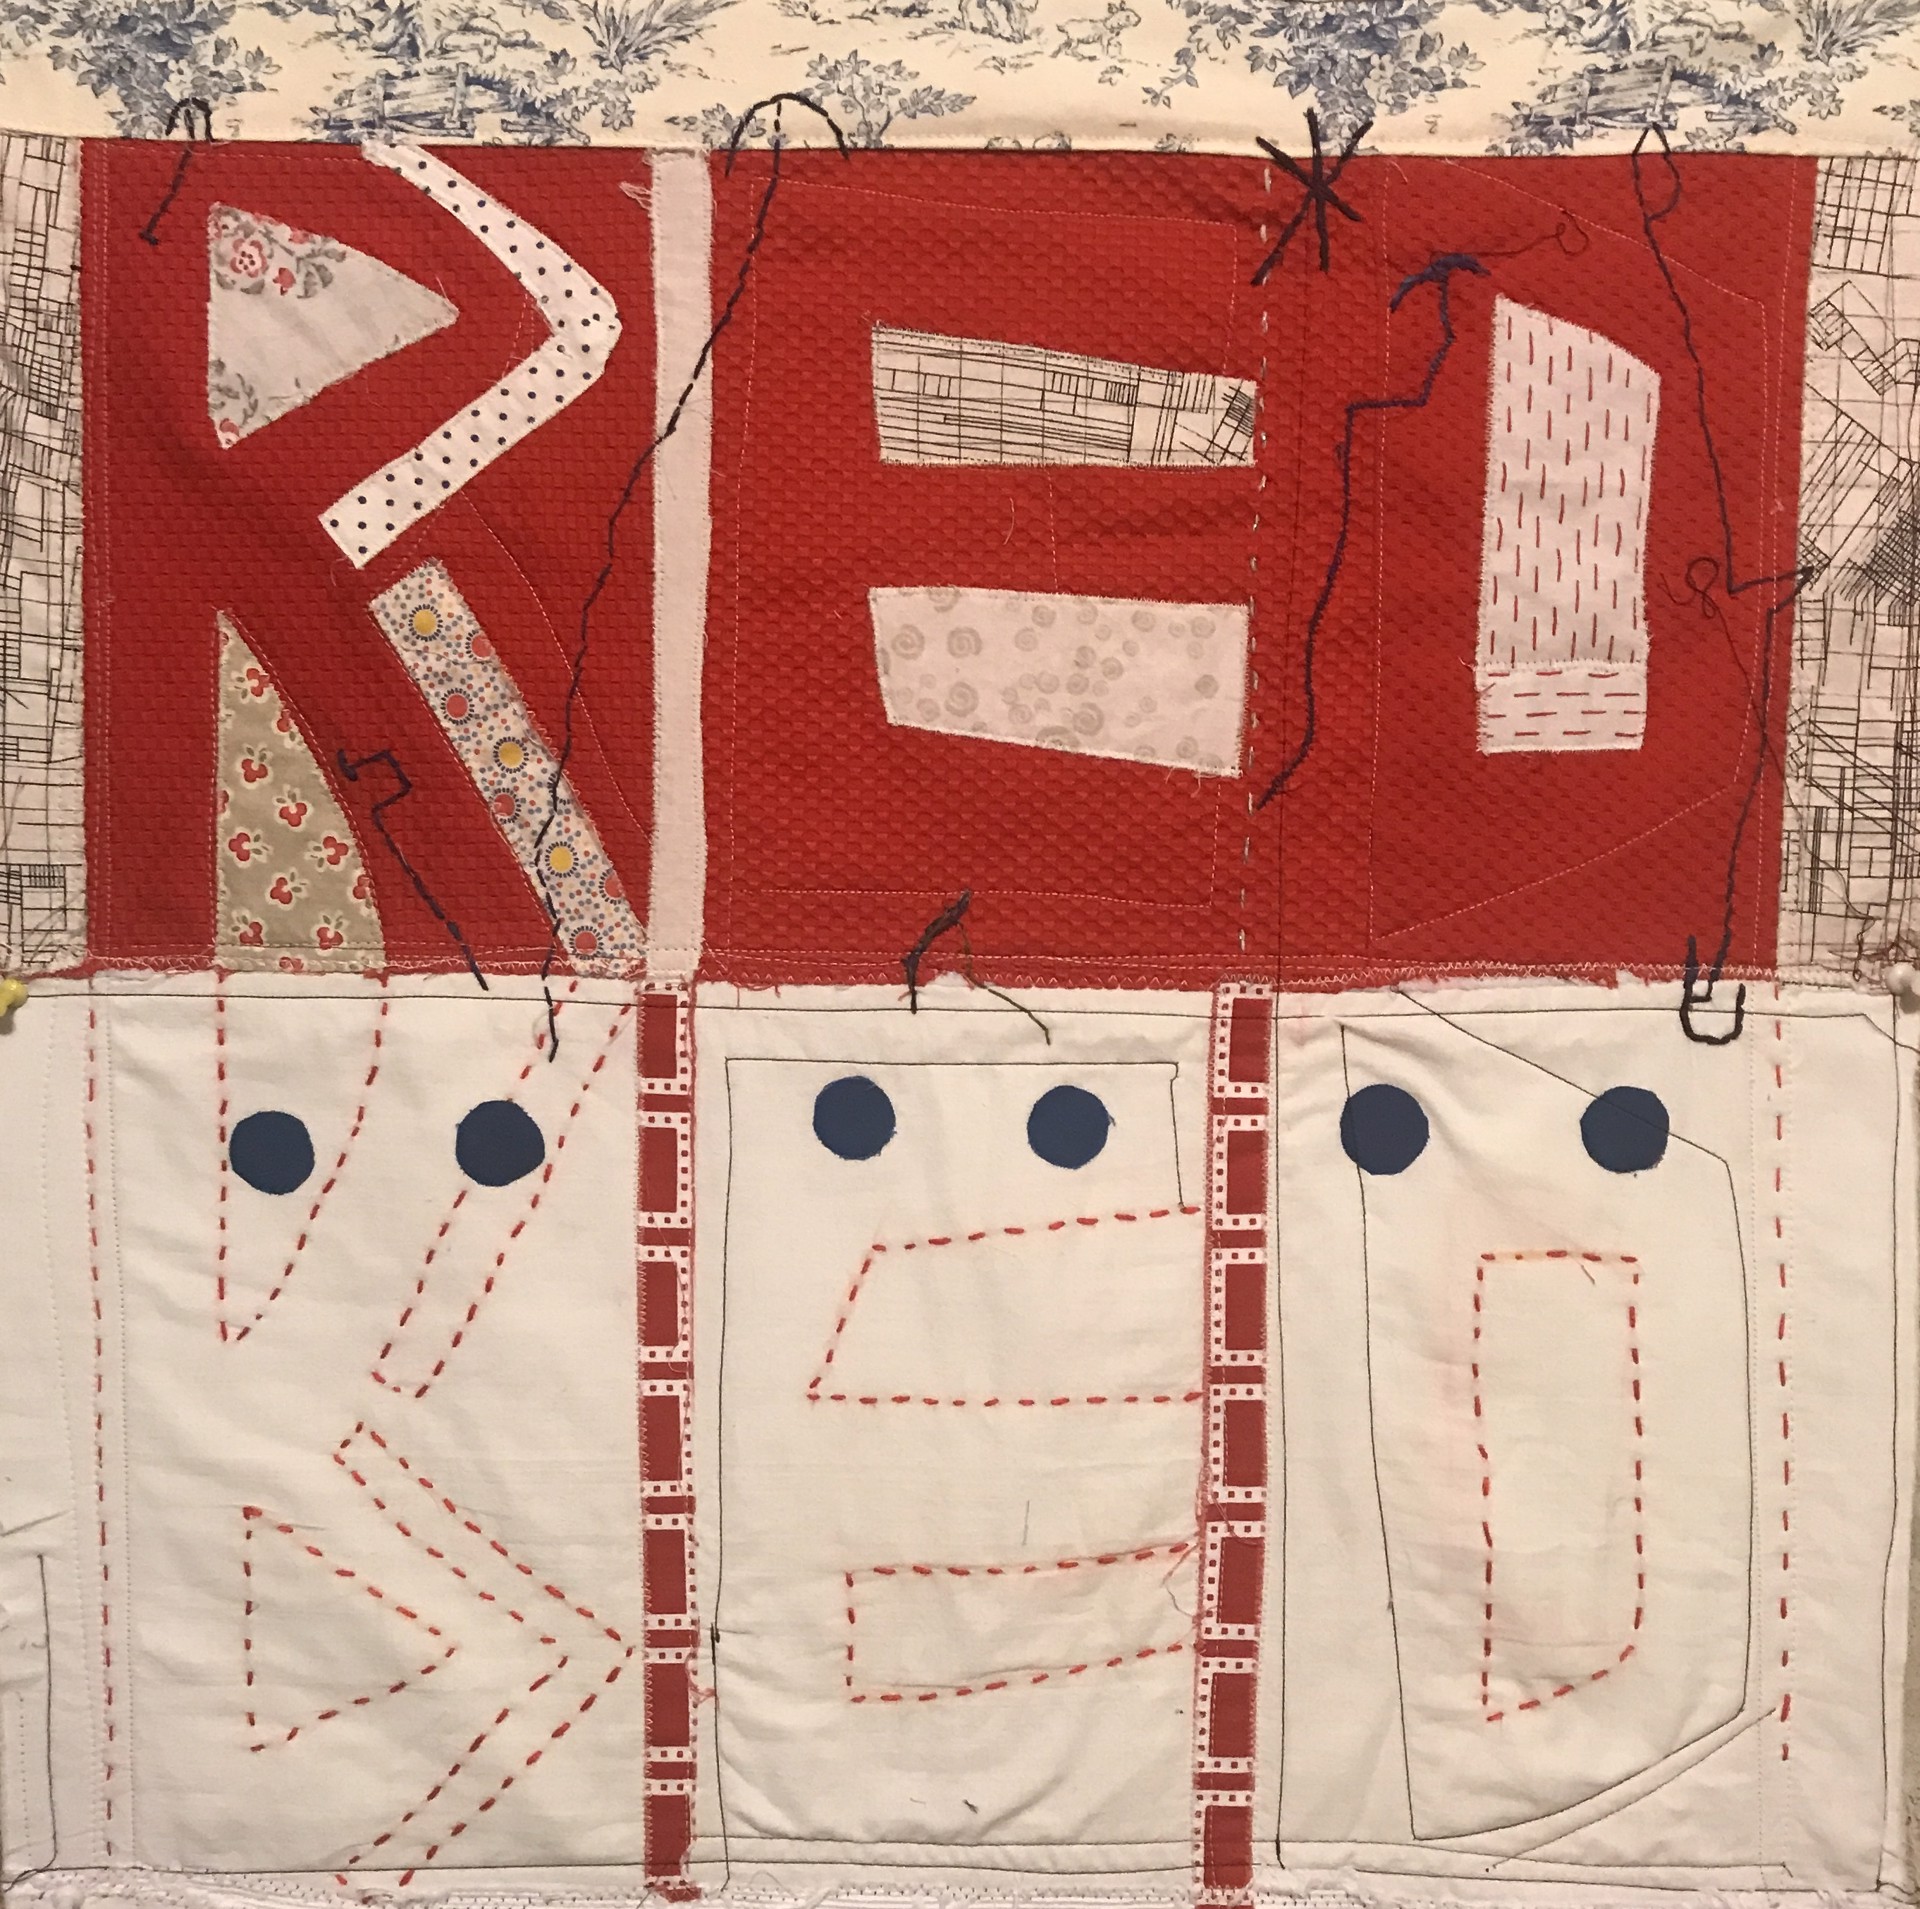 Reflections on a Red Letter Day by Alyson Vega